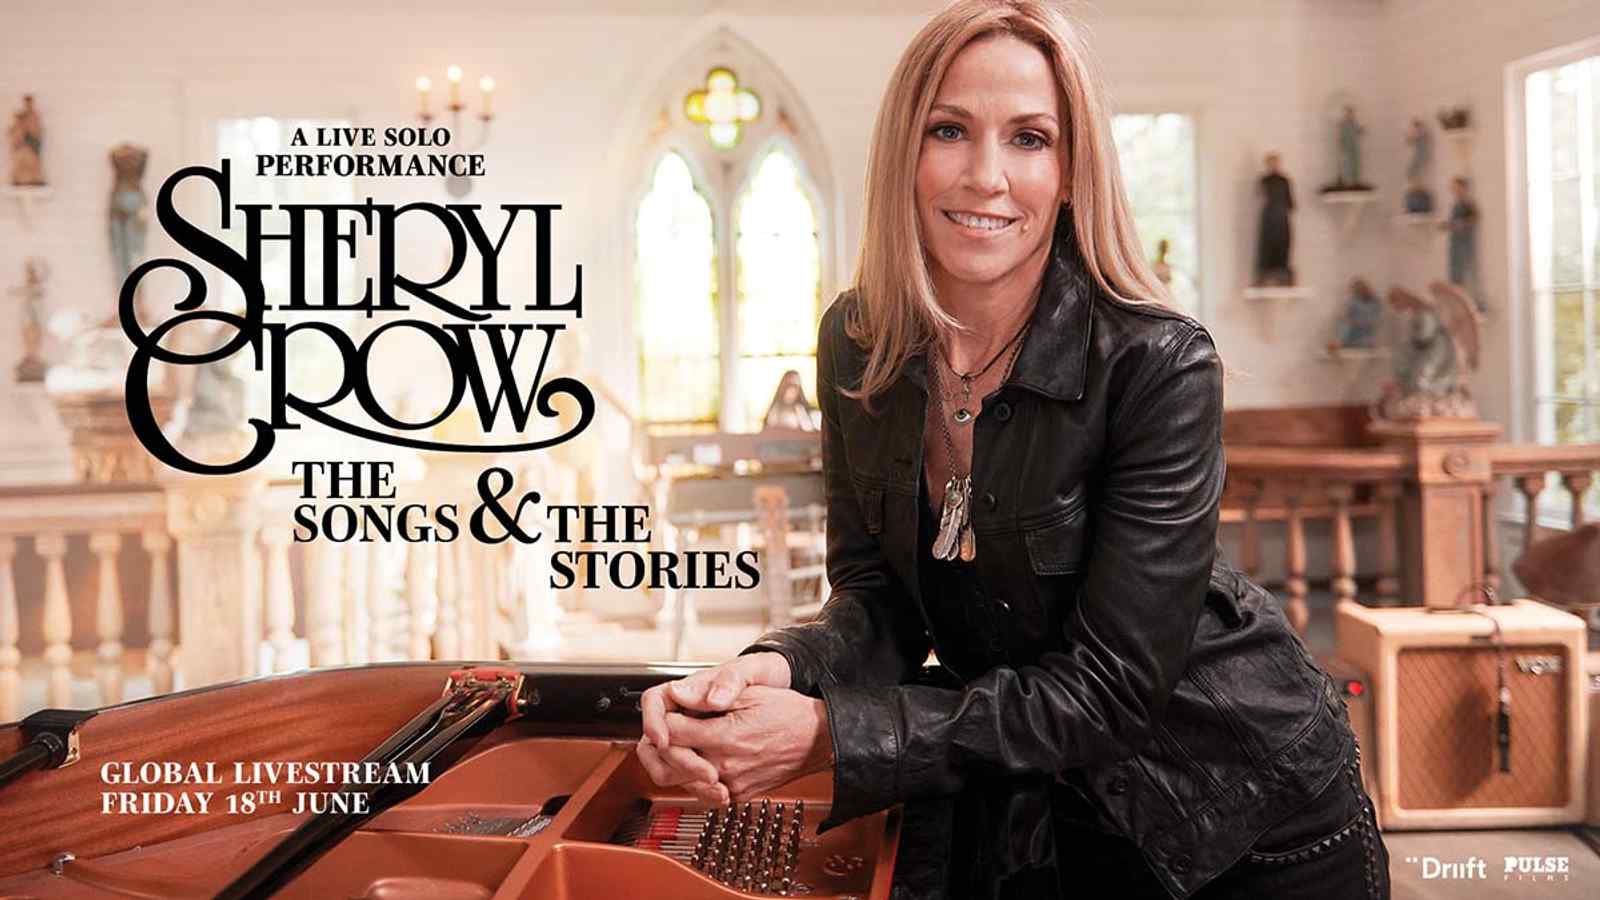 Sheryl Crow: The Songs And The Stories – A Live Solo Performance